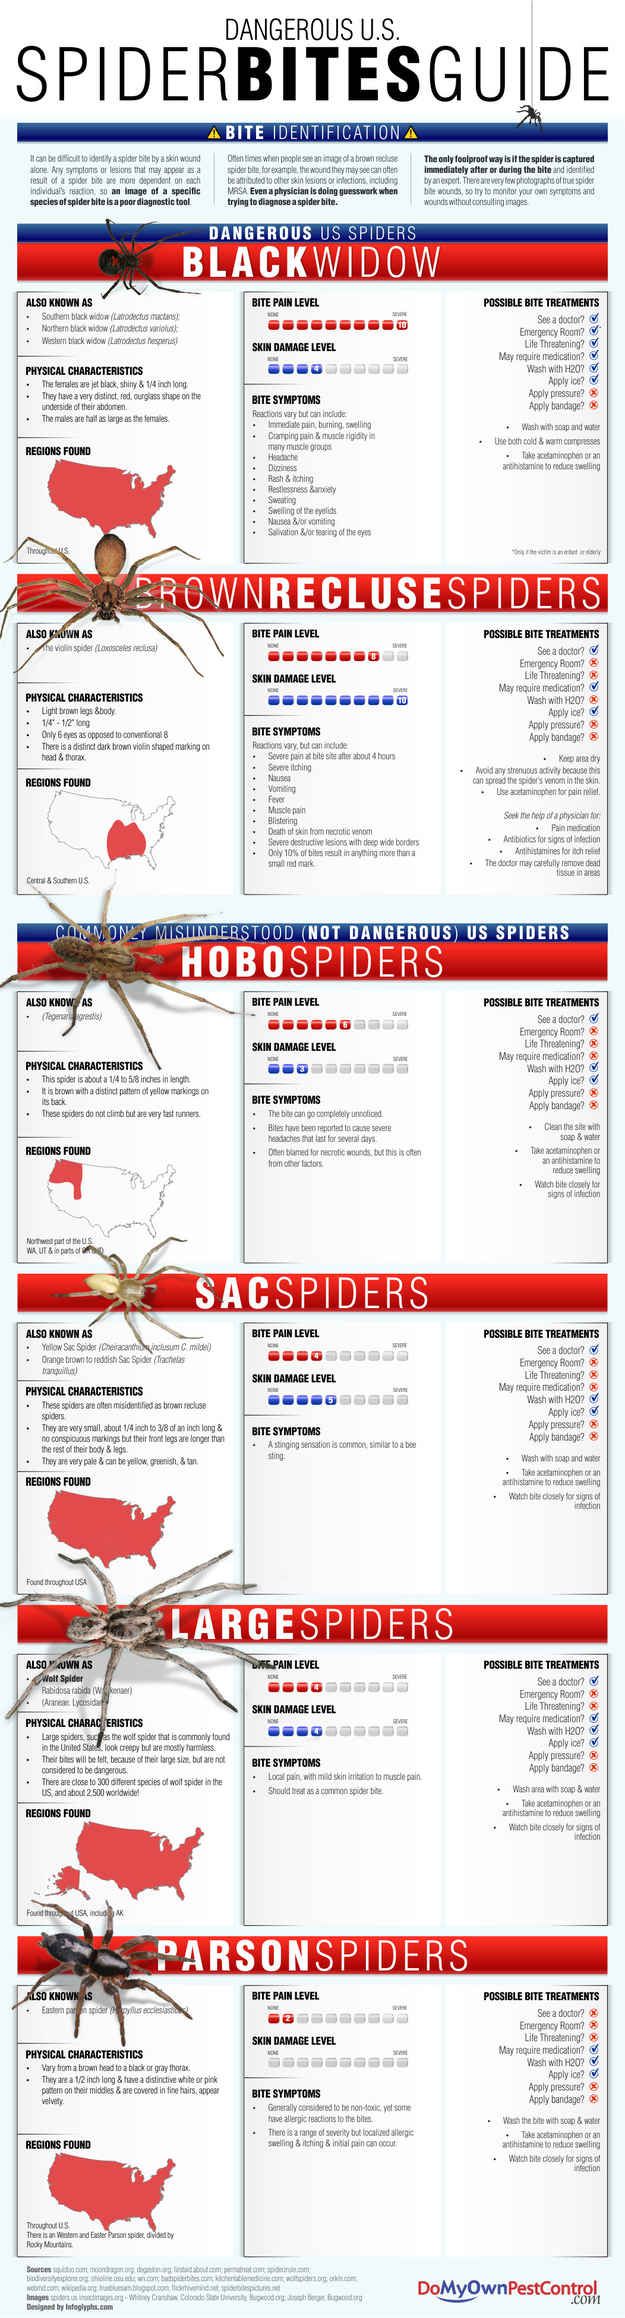 Guide to Spider Bites